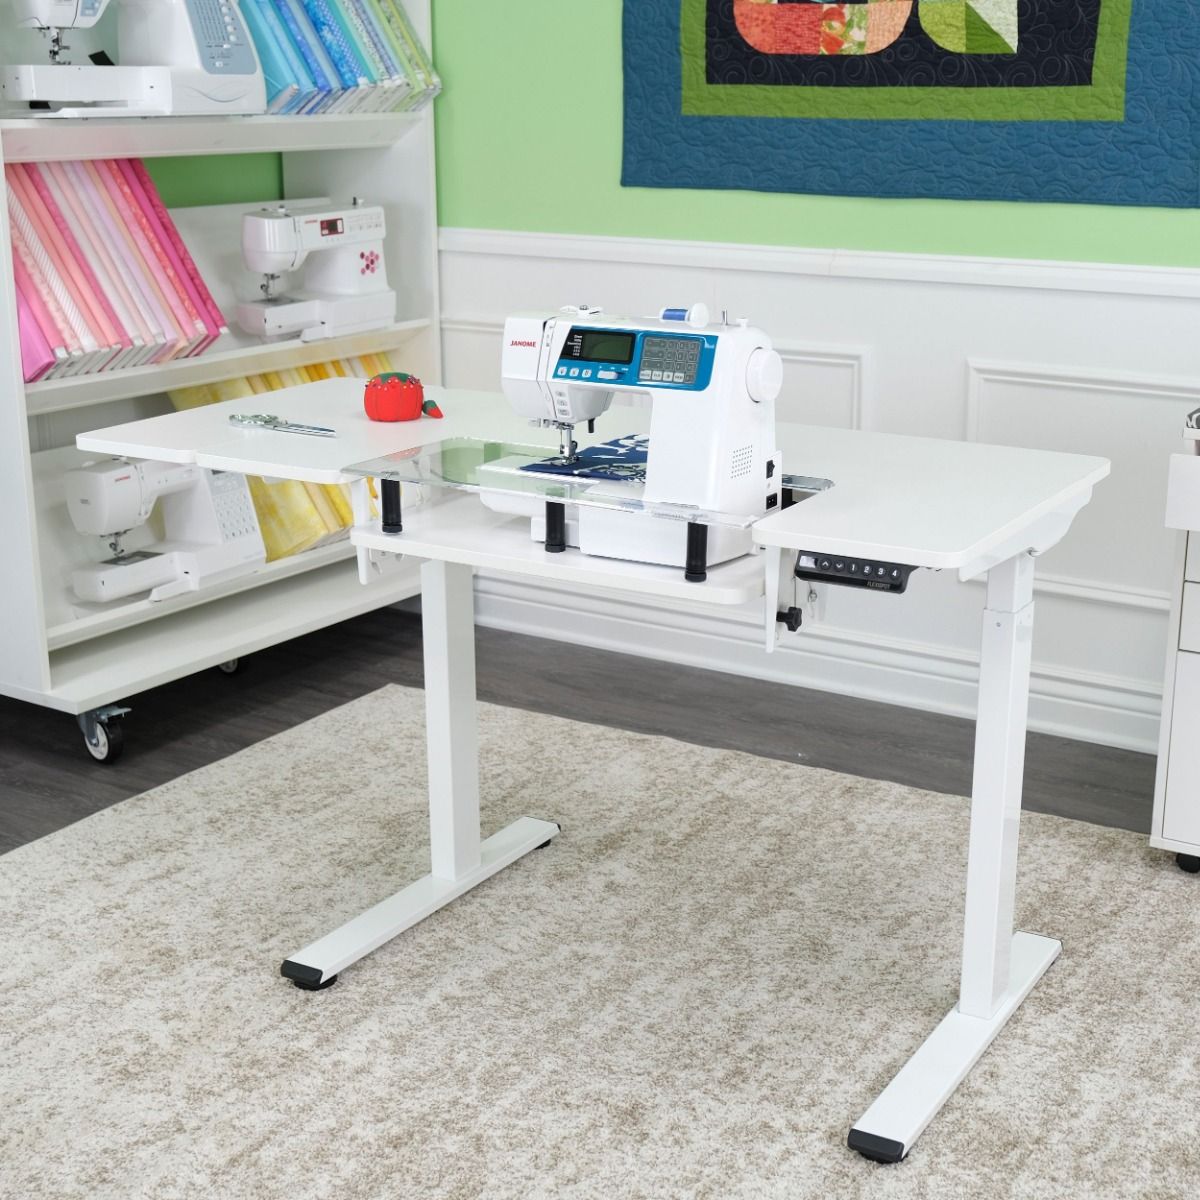 Arrow Sewing Eleanor Adjustable Serger and Sewing Table